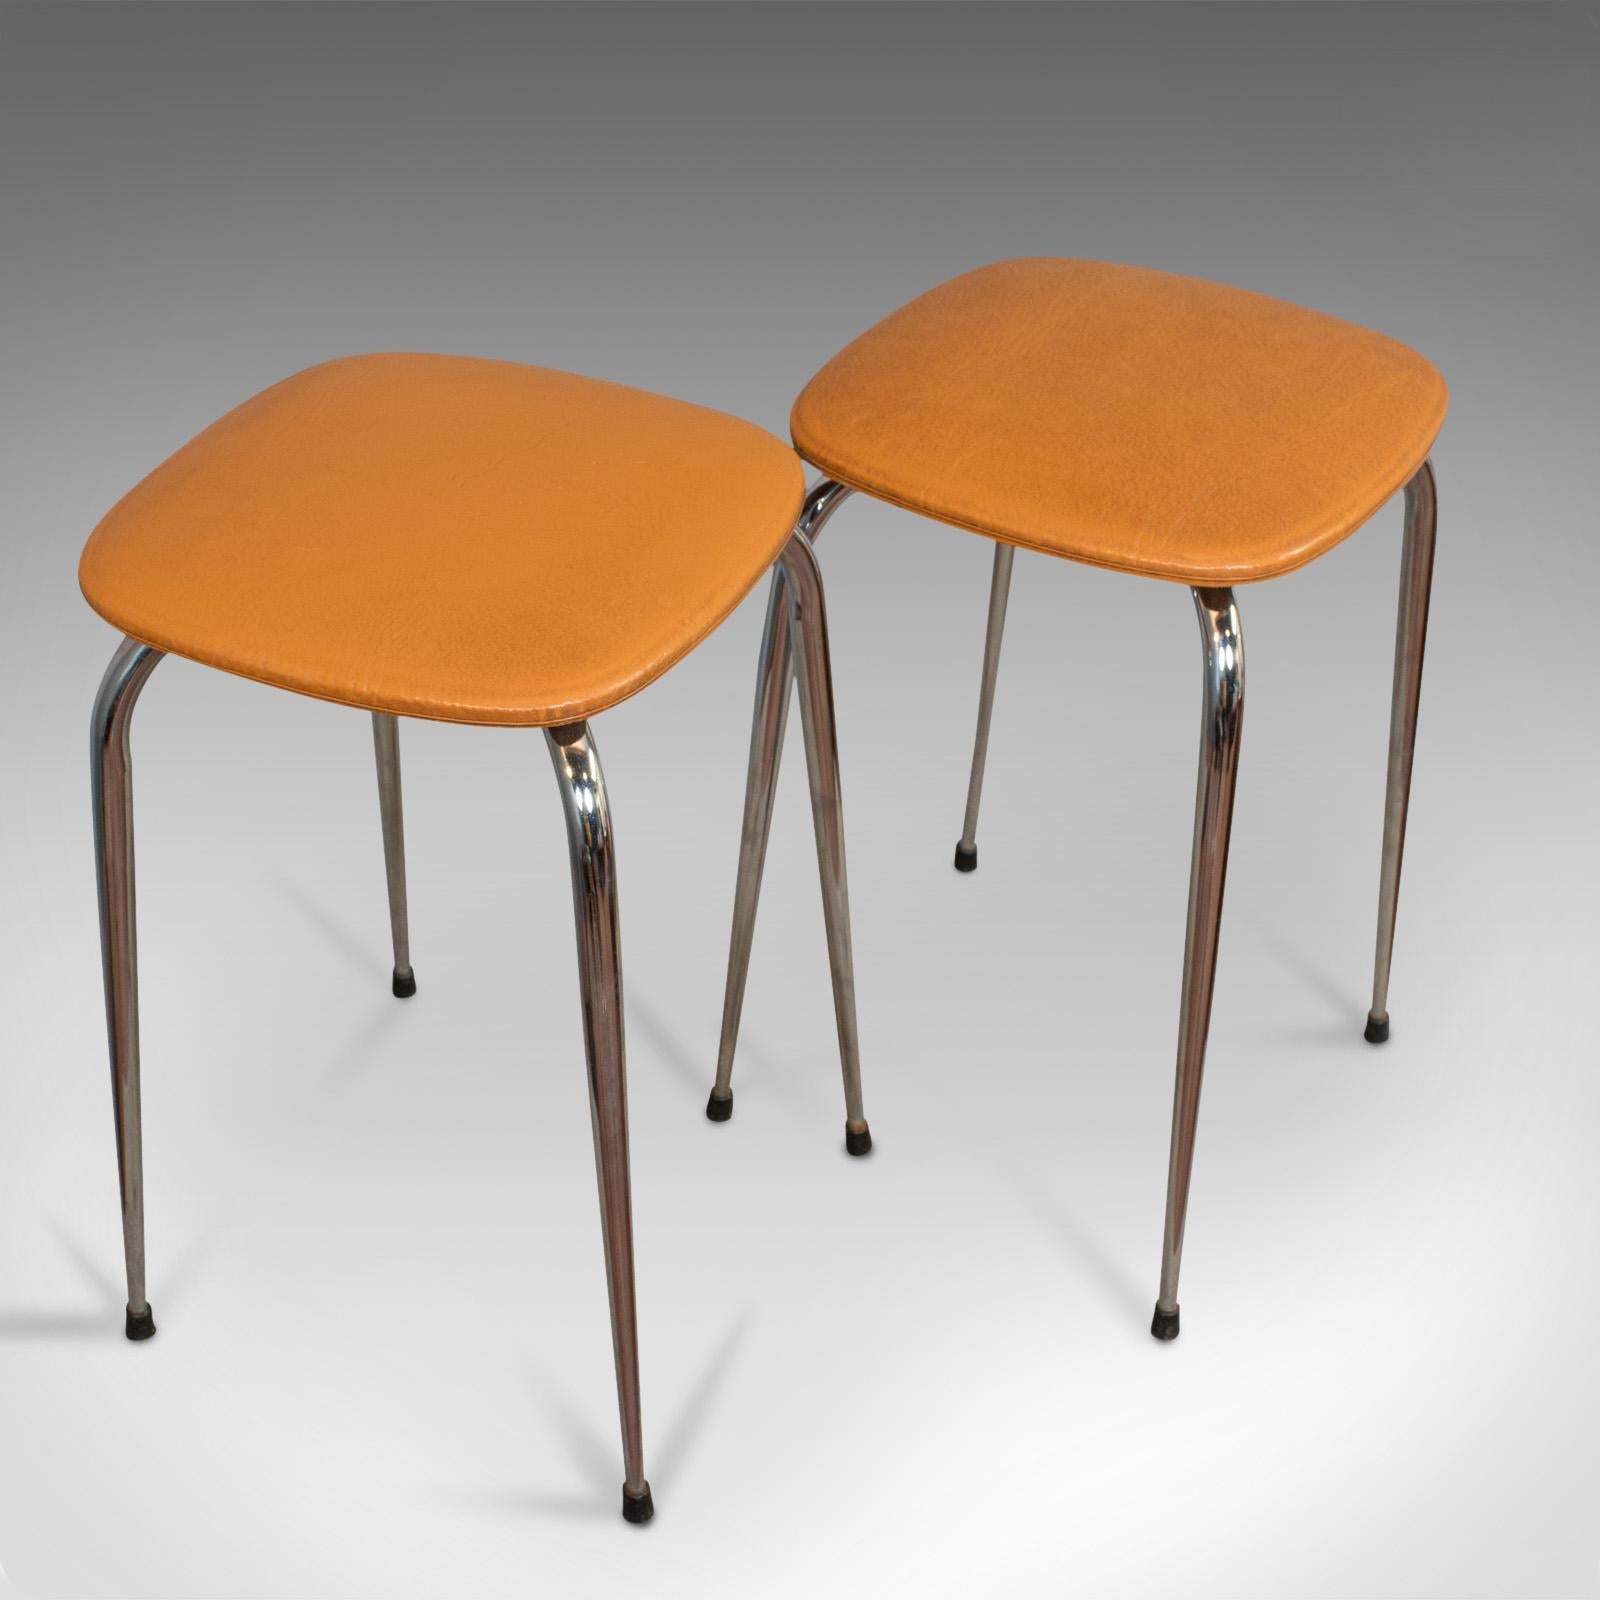 Pair of Vintage Lounge Stools, French, Leatherette, 1960s Stool, 20th Century For Sale 1